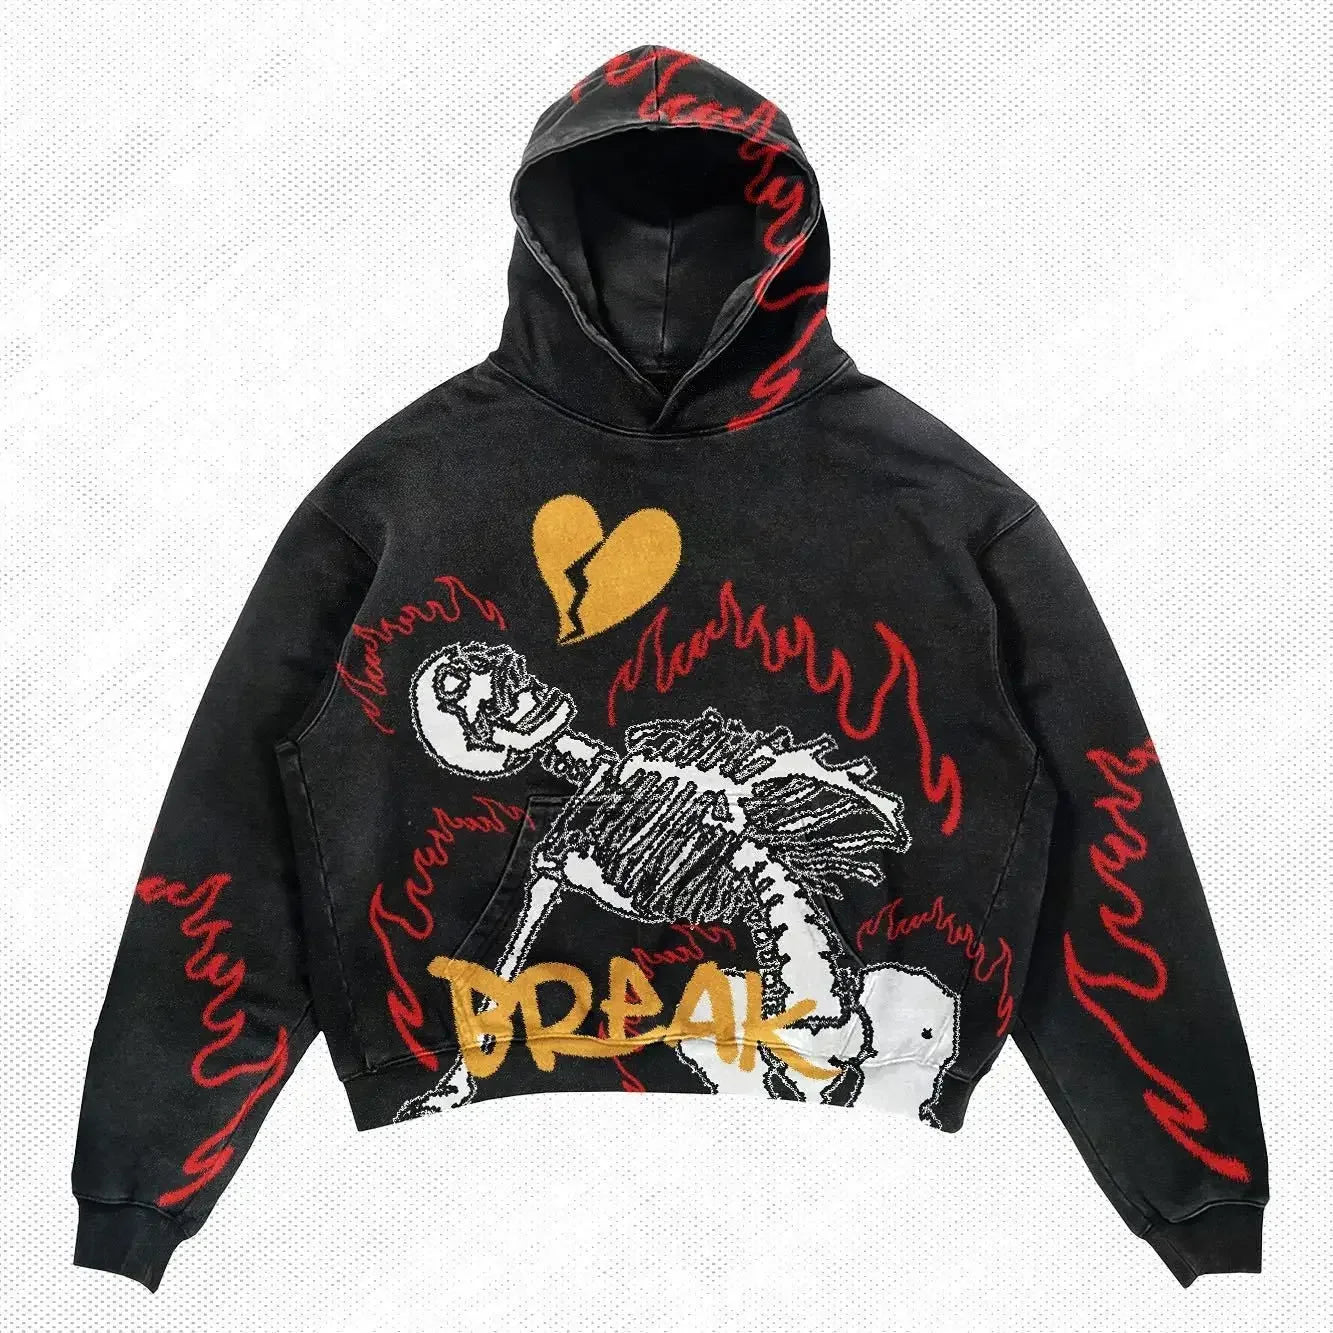 A black hoodie with red flame designs, a skeleton graphic, a broken heart, and the word "BREAK" in yellow text on the front, perfect for those who love punk style and men's fashion. Introducing the Explosions Printed Skull Y2K Retro Hooded Sweater Coat Street Style Gothic Casual Fashion Hooded Sweater Men's Female from Maramalive™.